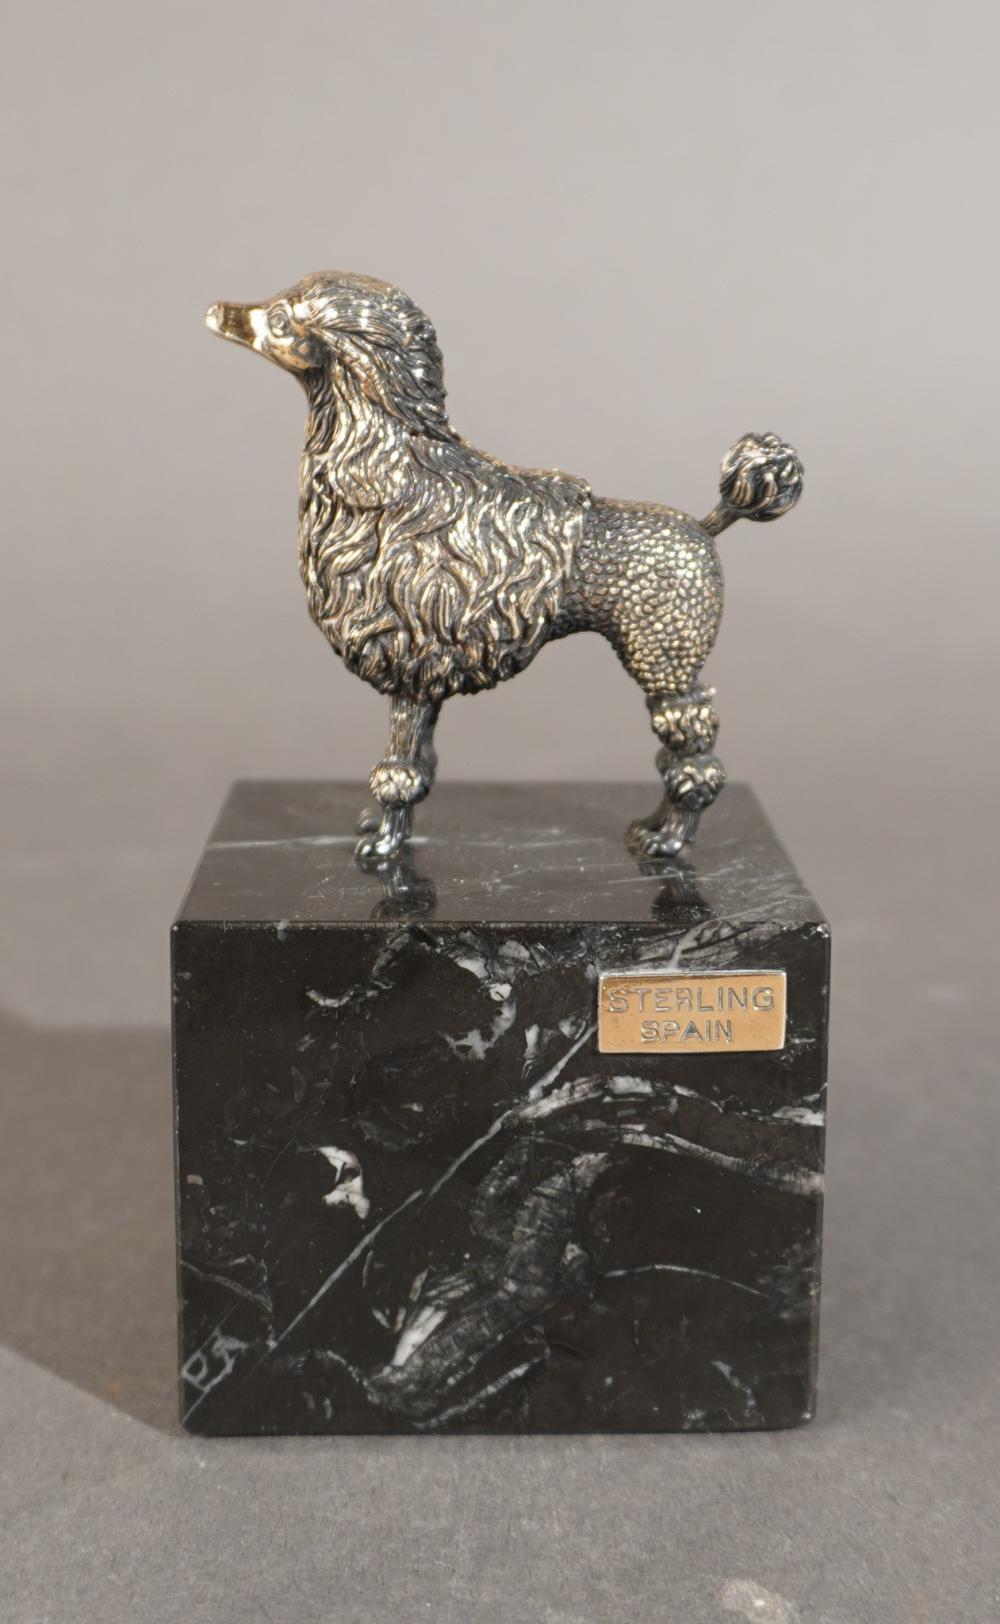 SPANISH STERLING SILVER POODLE 2e78ac